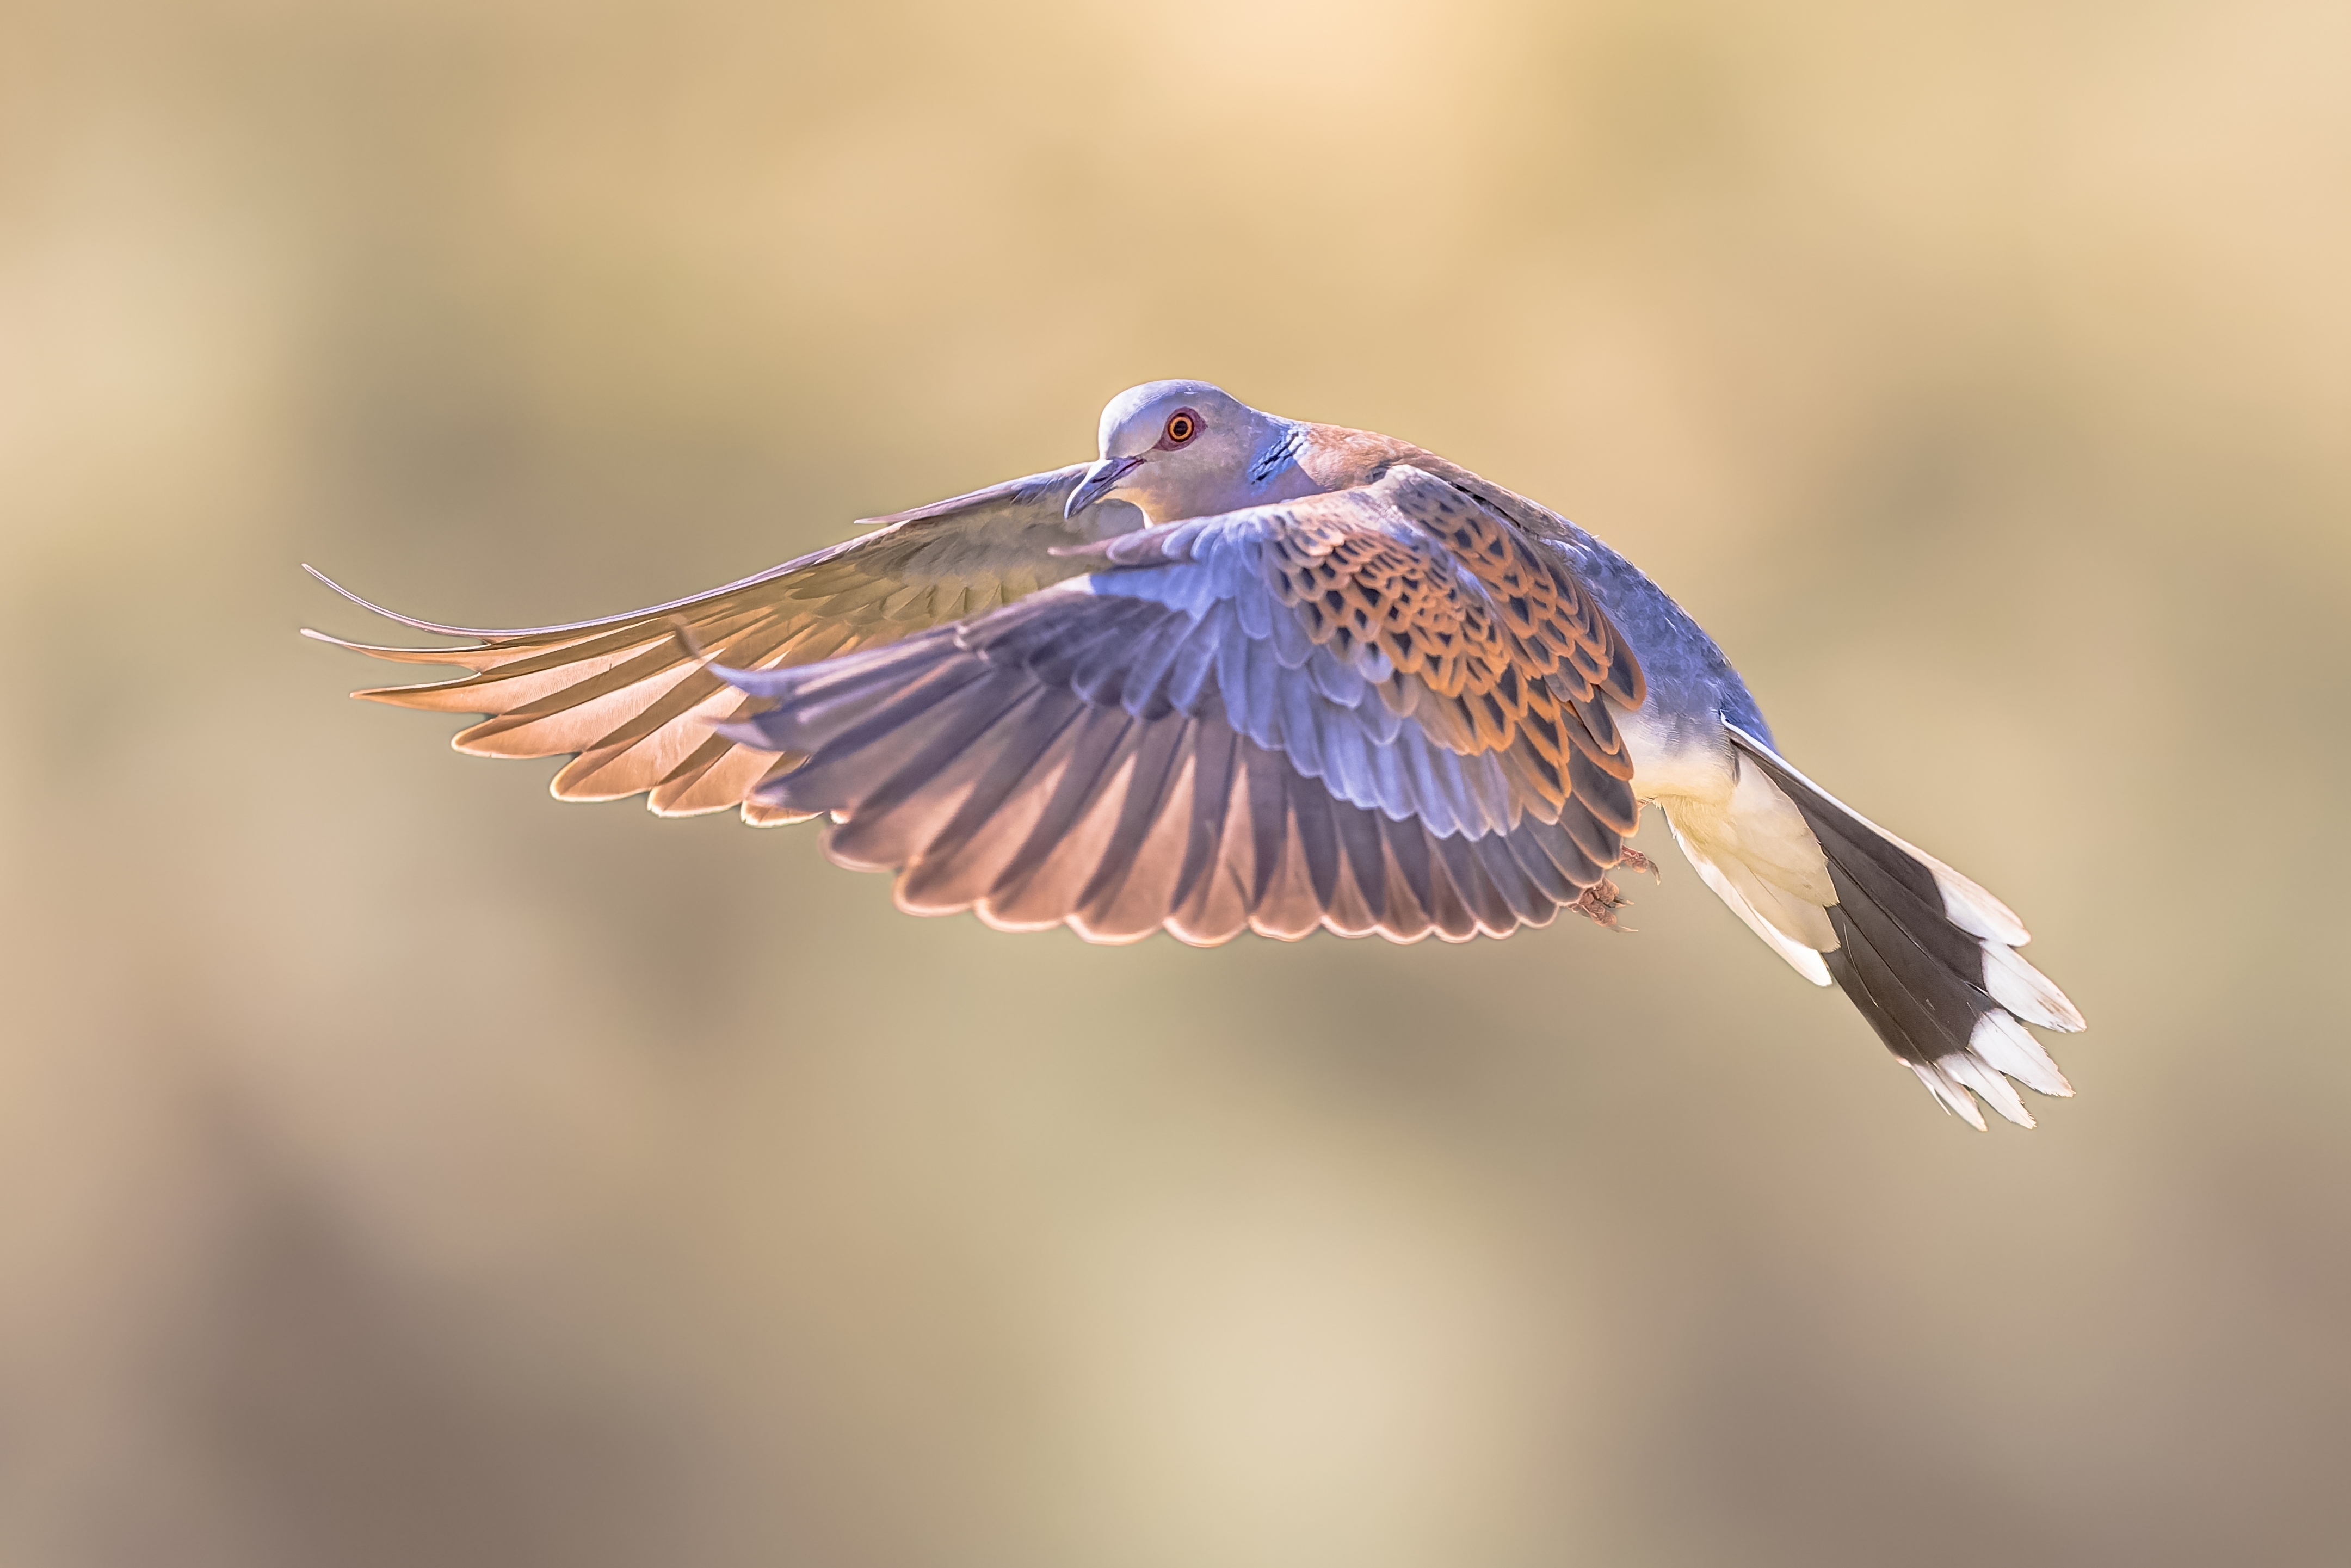 Cyprus fails to allow recovery of turtle doves